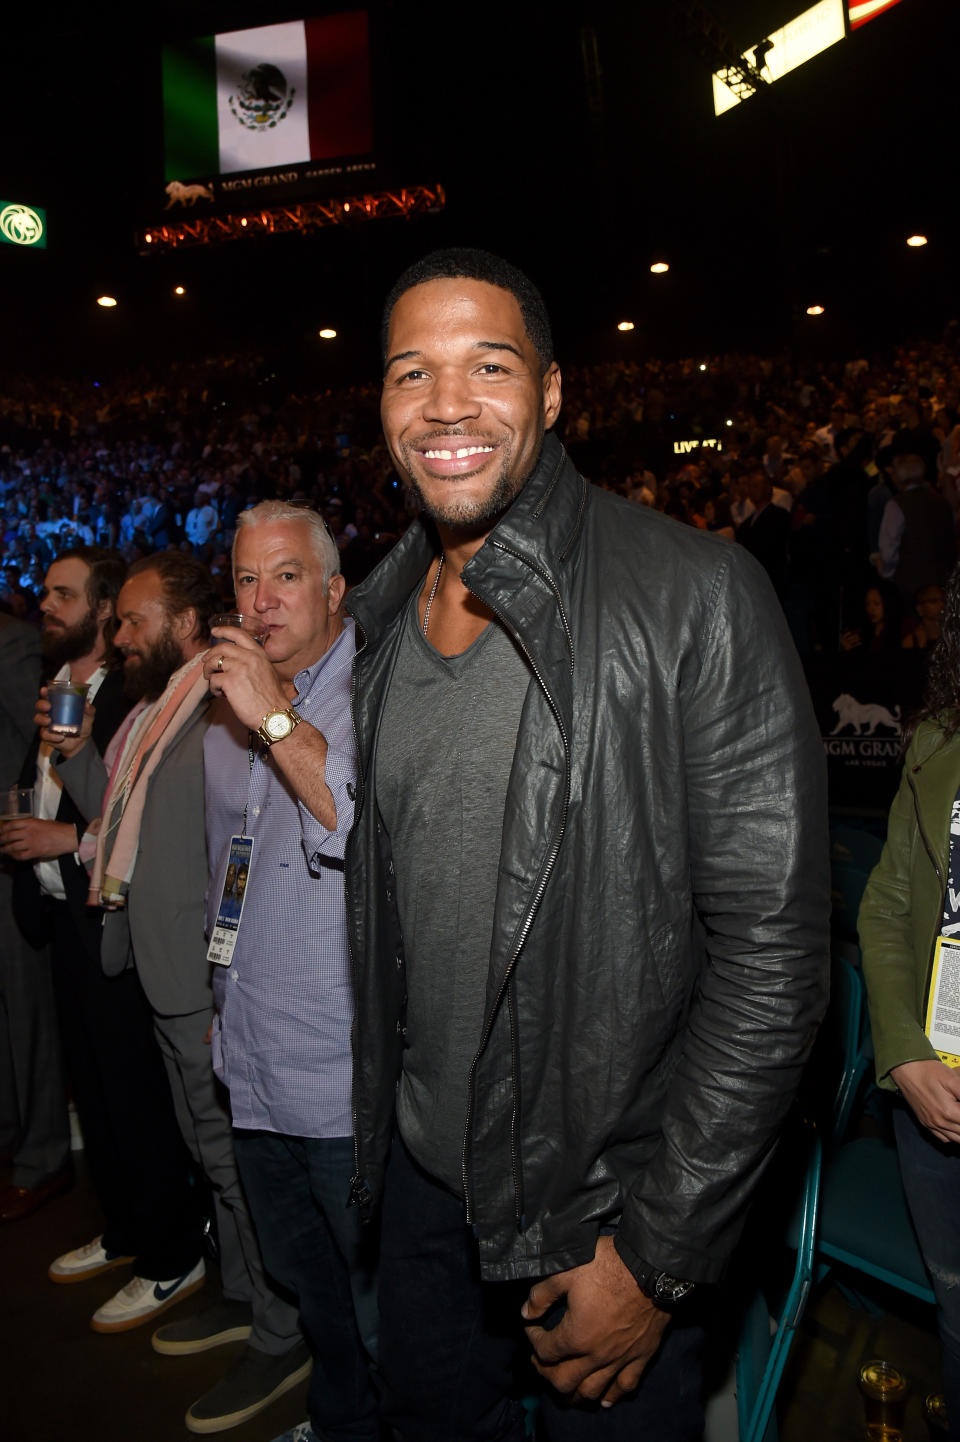 LAS VEGAS, NV - MAY 02:  TV personality Michael Strahan stand ringside At 'Mayweather VS Pacquiao' presented by SHOWTIME PPV And HBO PPV at MGM Grand Garden Arena on May 2, 2015 in Las Vegas, Nevada.  (Photo by Ethan Miller/Getty Images for SHOWTIME)